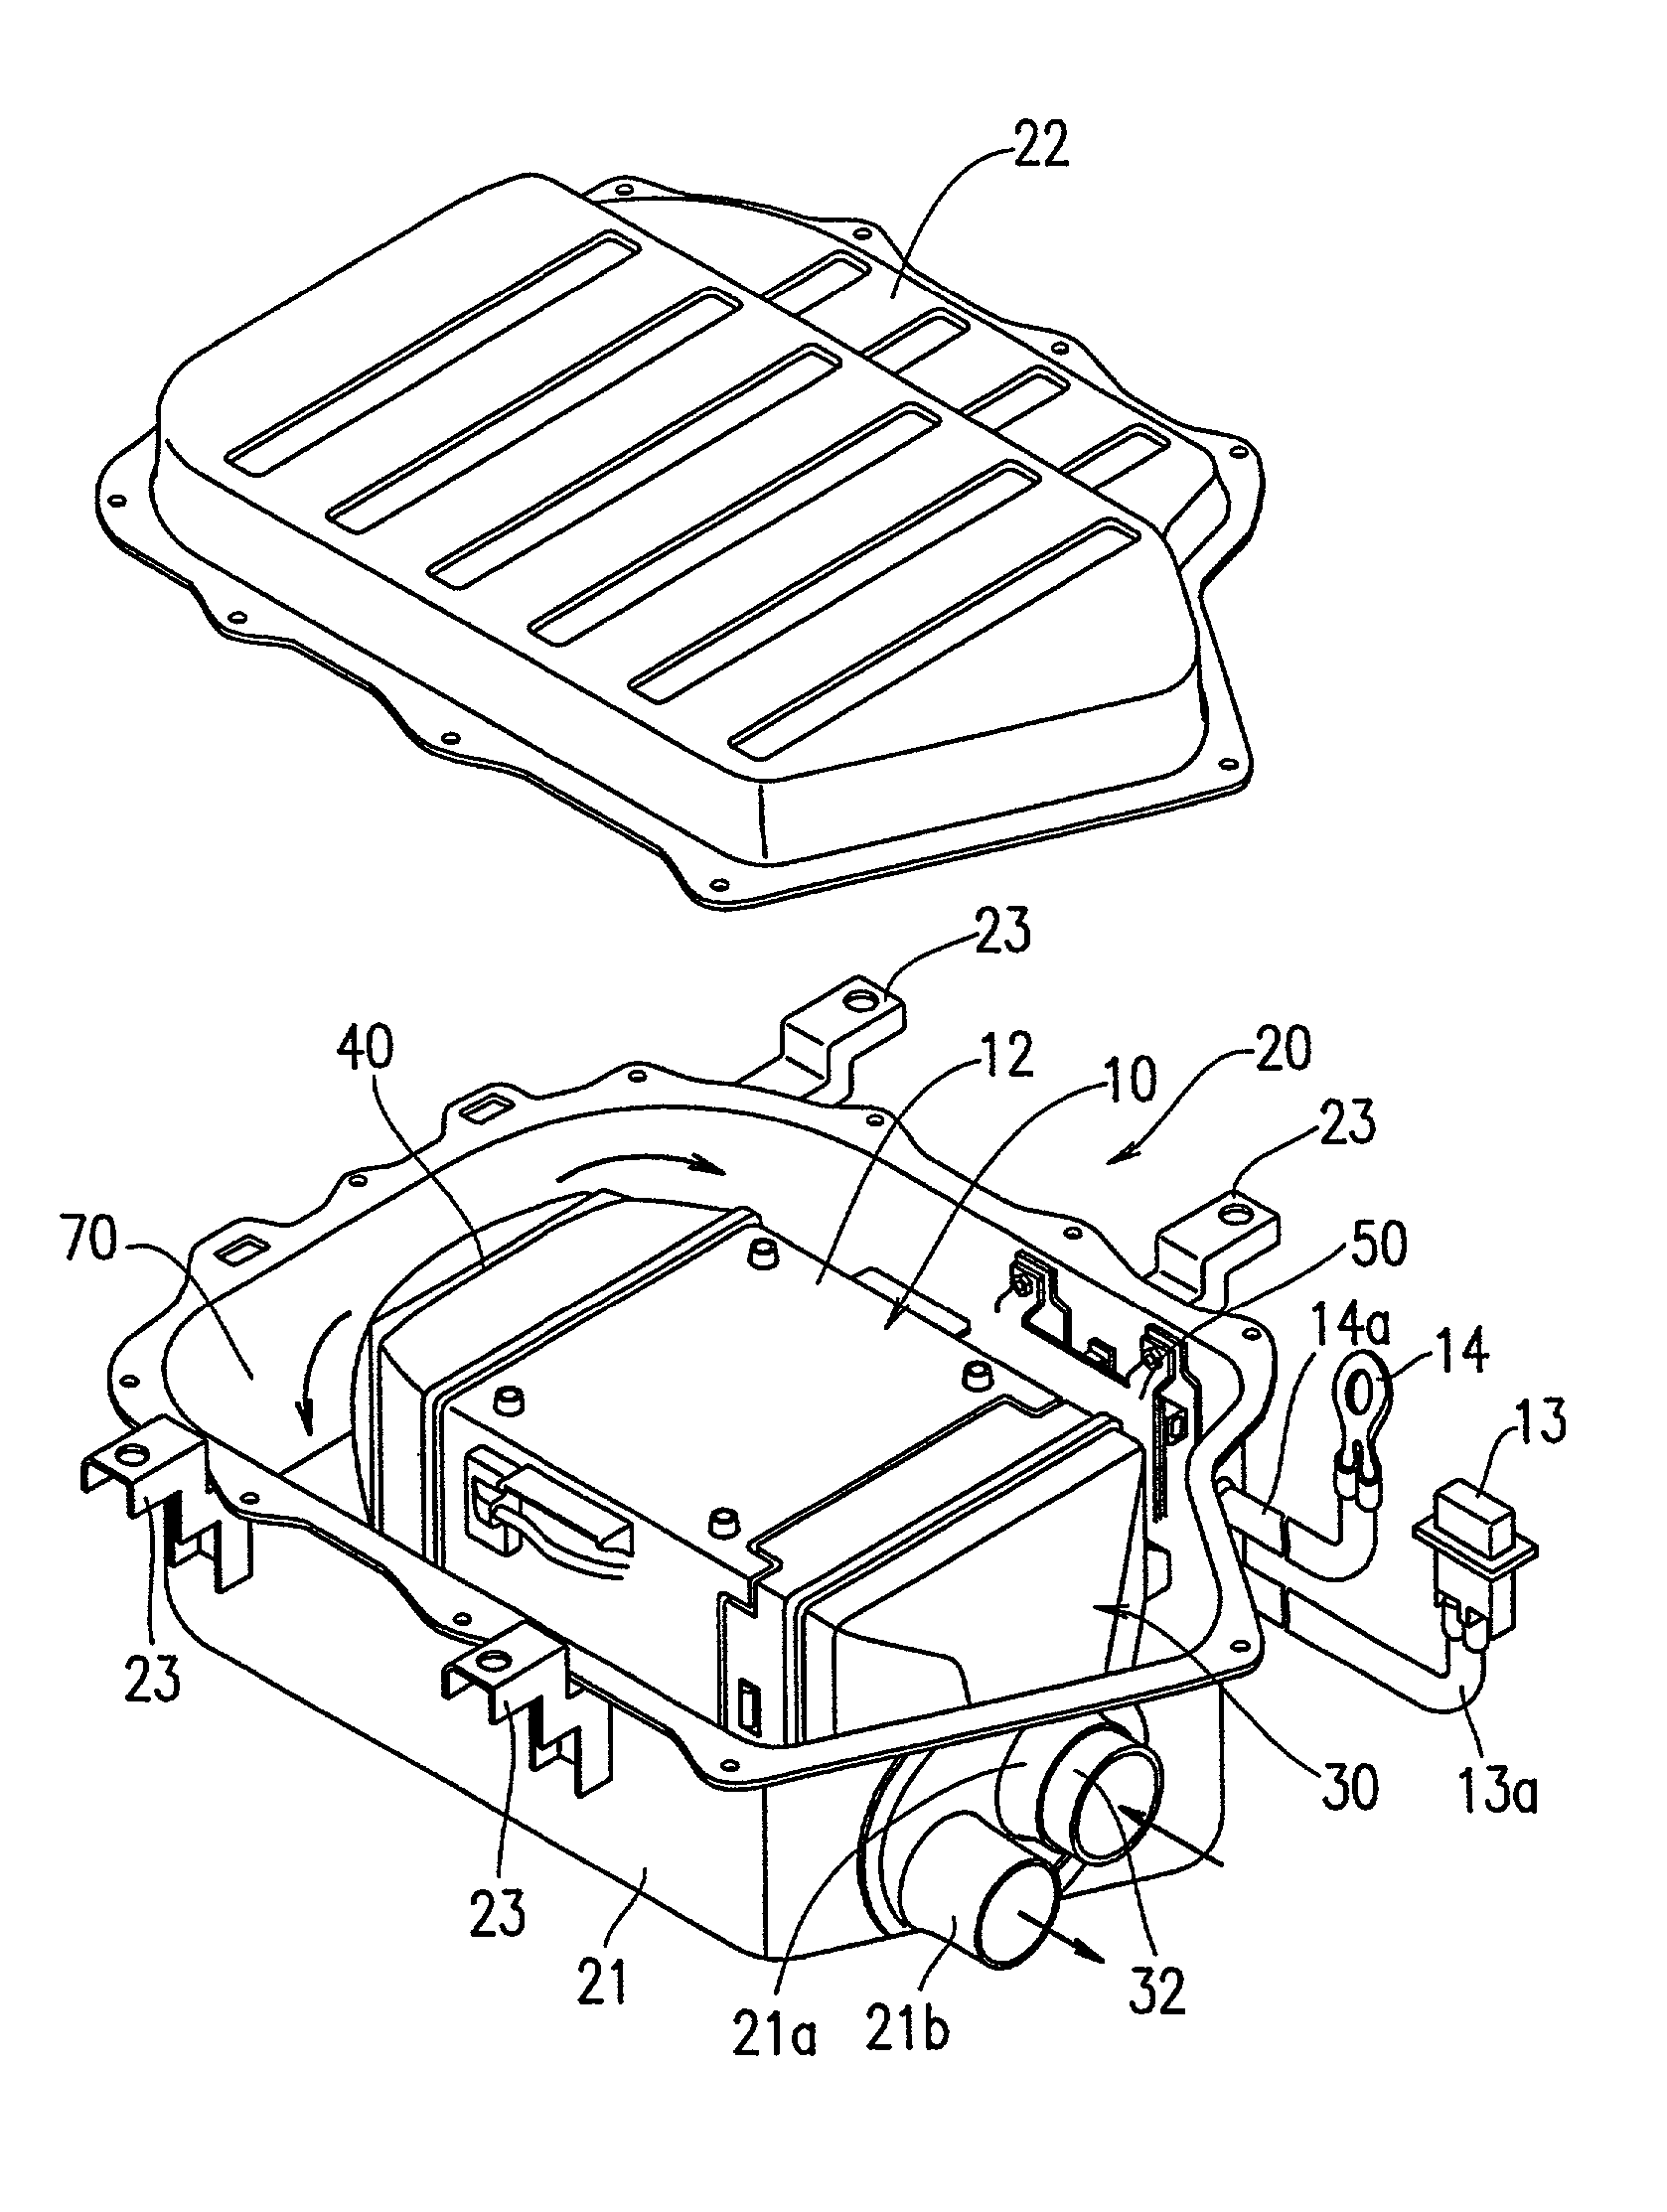 Battery power supply device